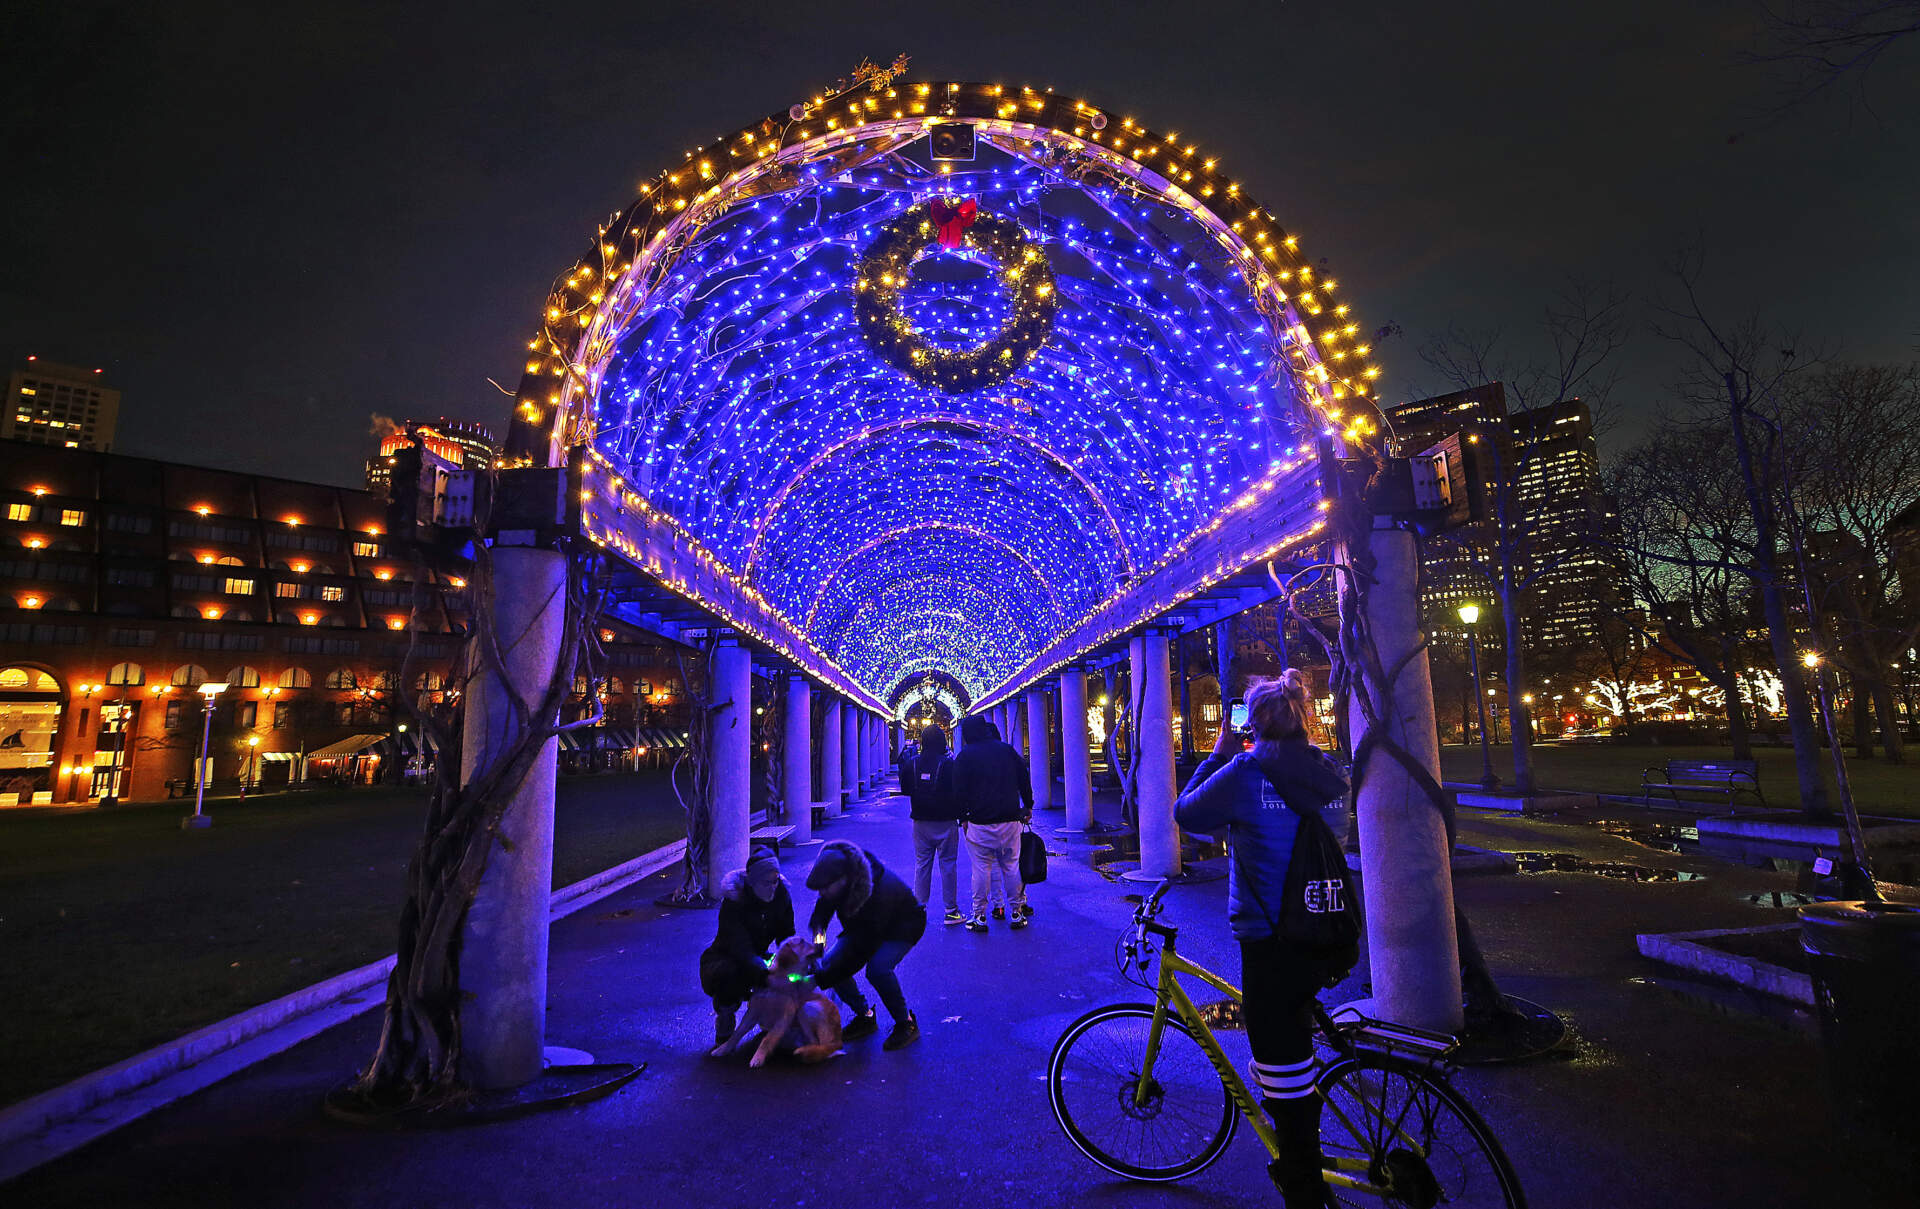 The trellis in Christopher Columbus Park is lit and decorated for the holiday season. (Jim Davis/The Boston Globe via Getty Images)